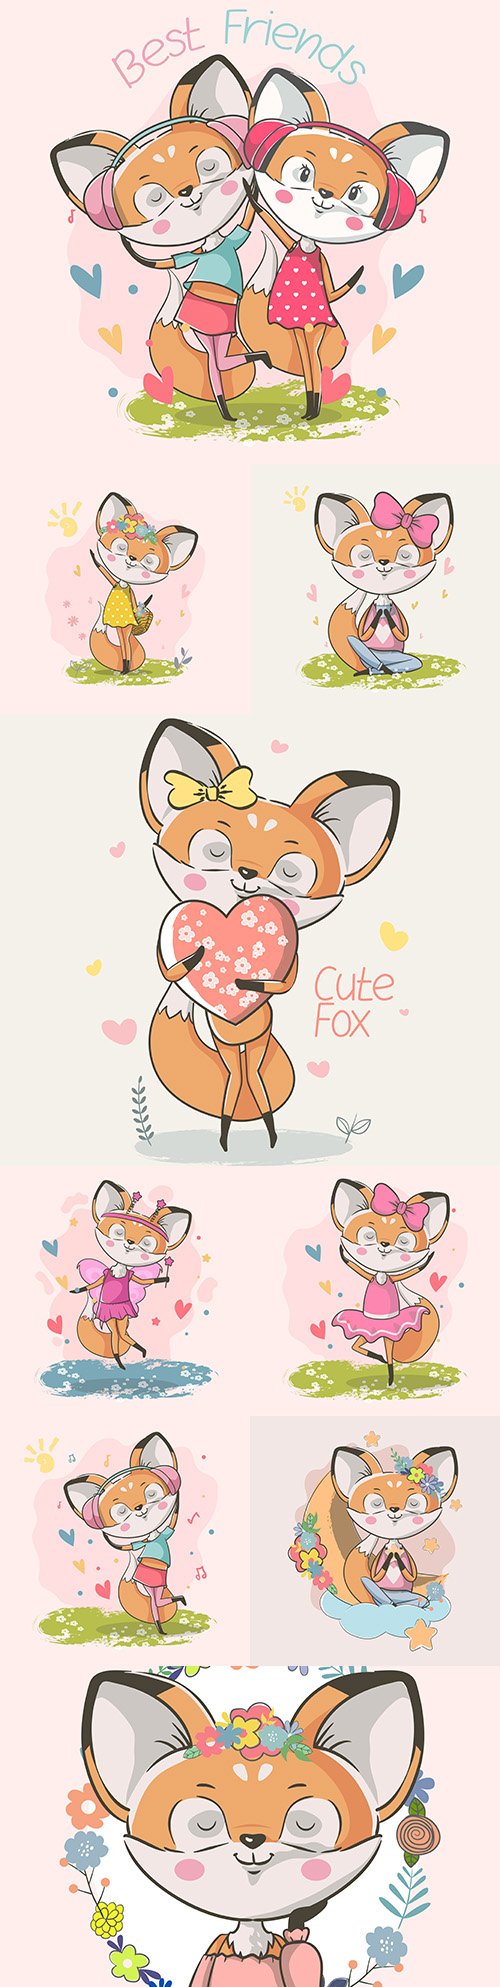 Cute little fox fashion with colors painted illustrations